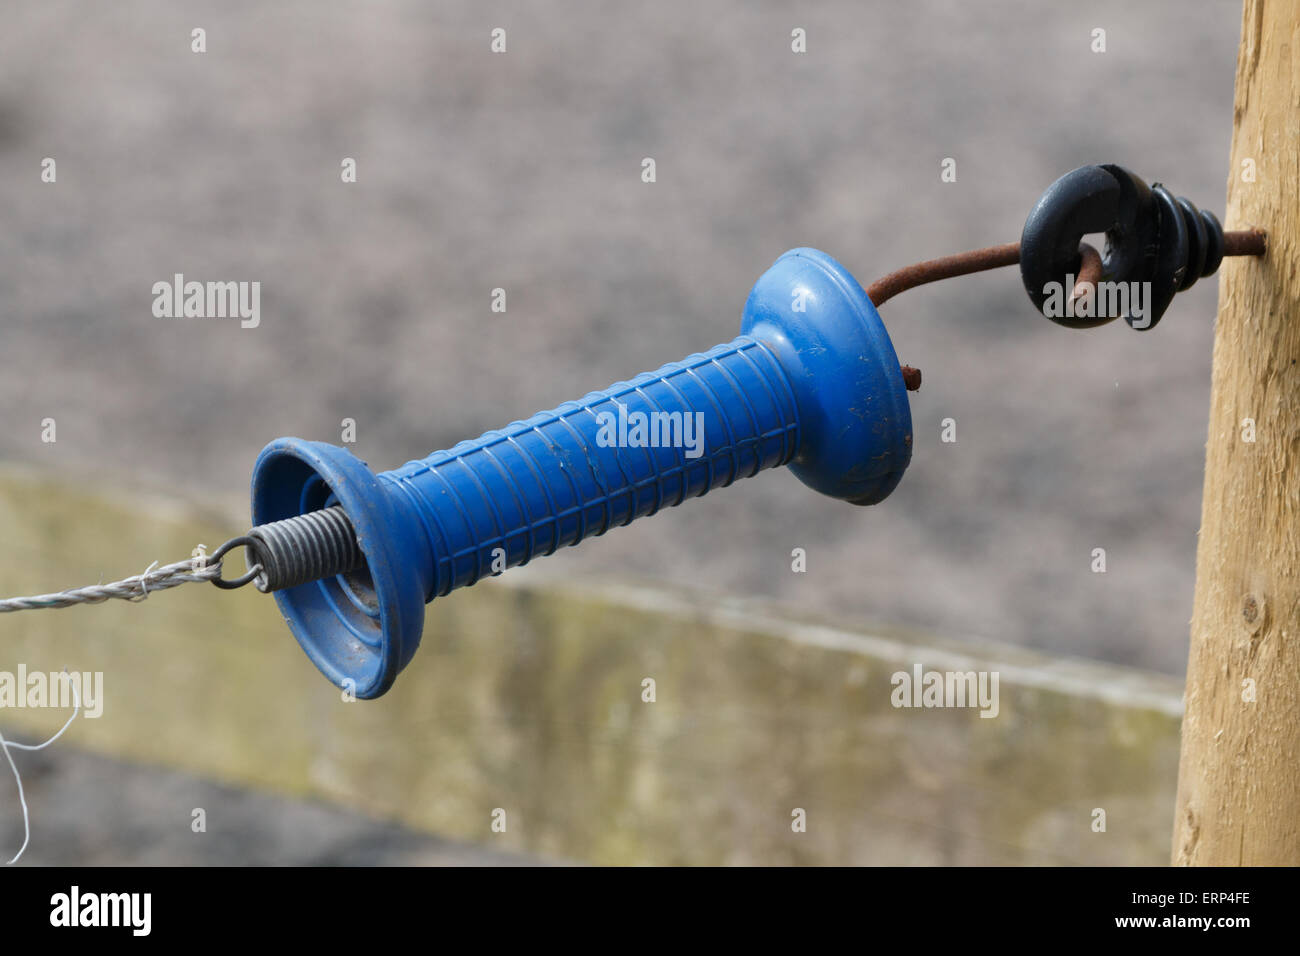 Electric fence gate insulator handle Stock Photo